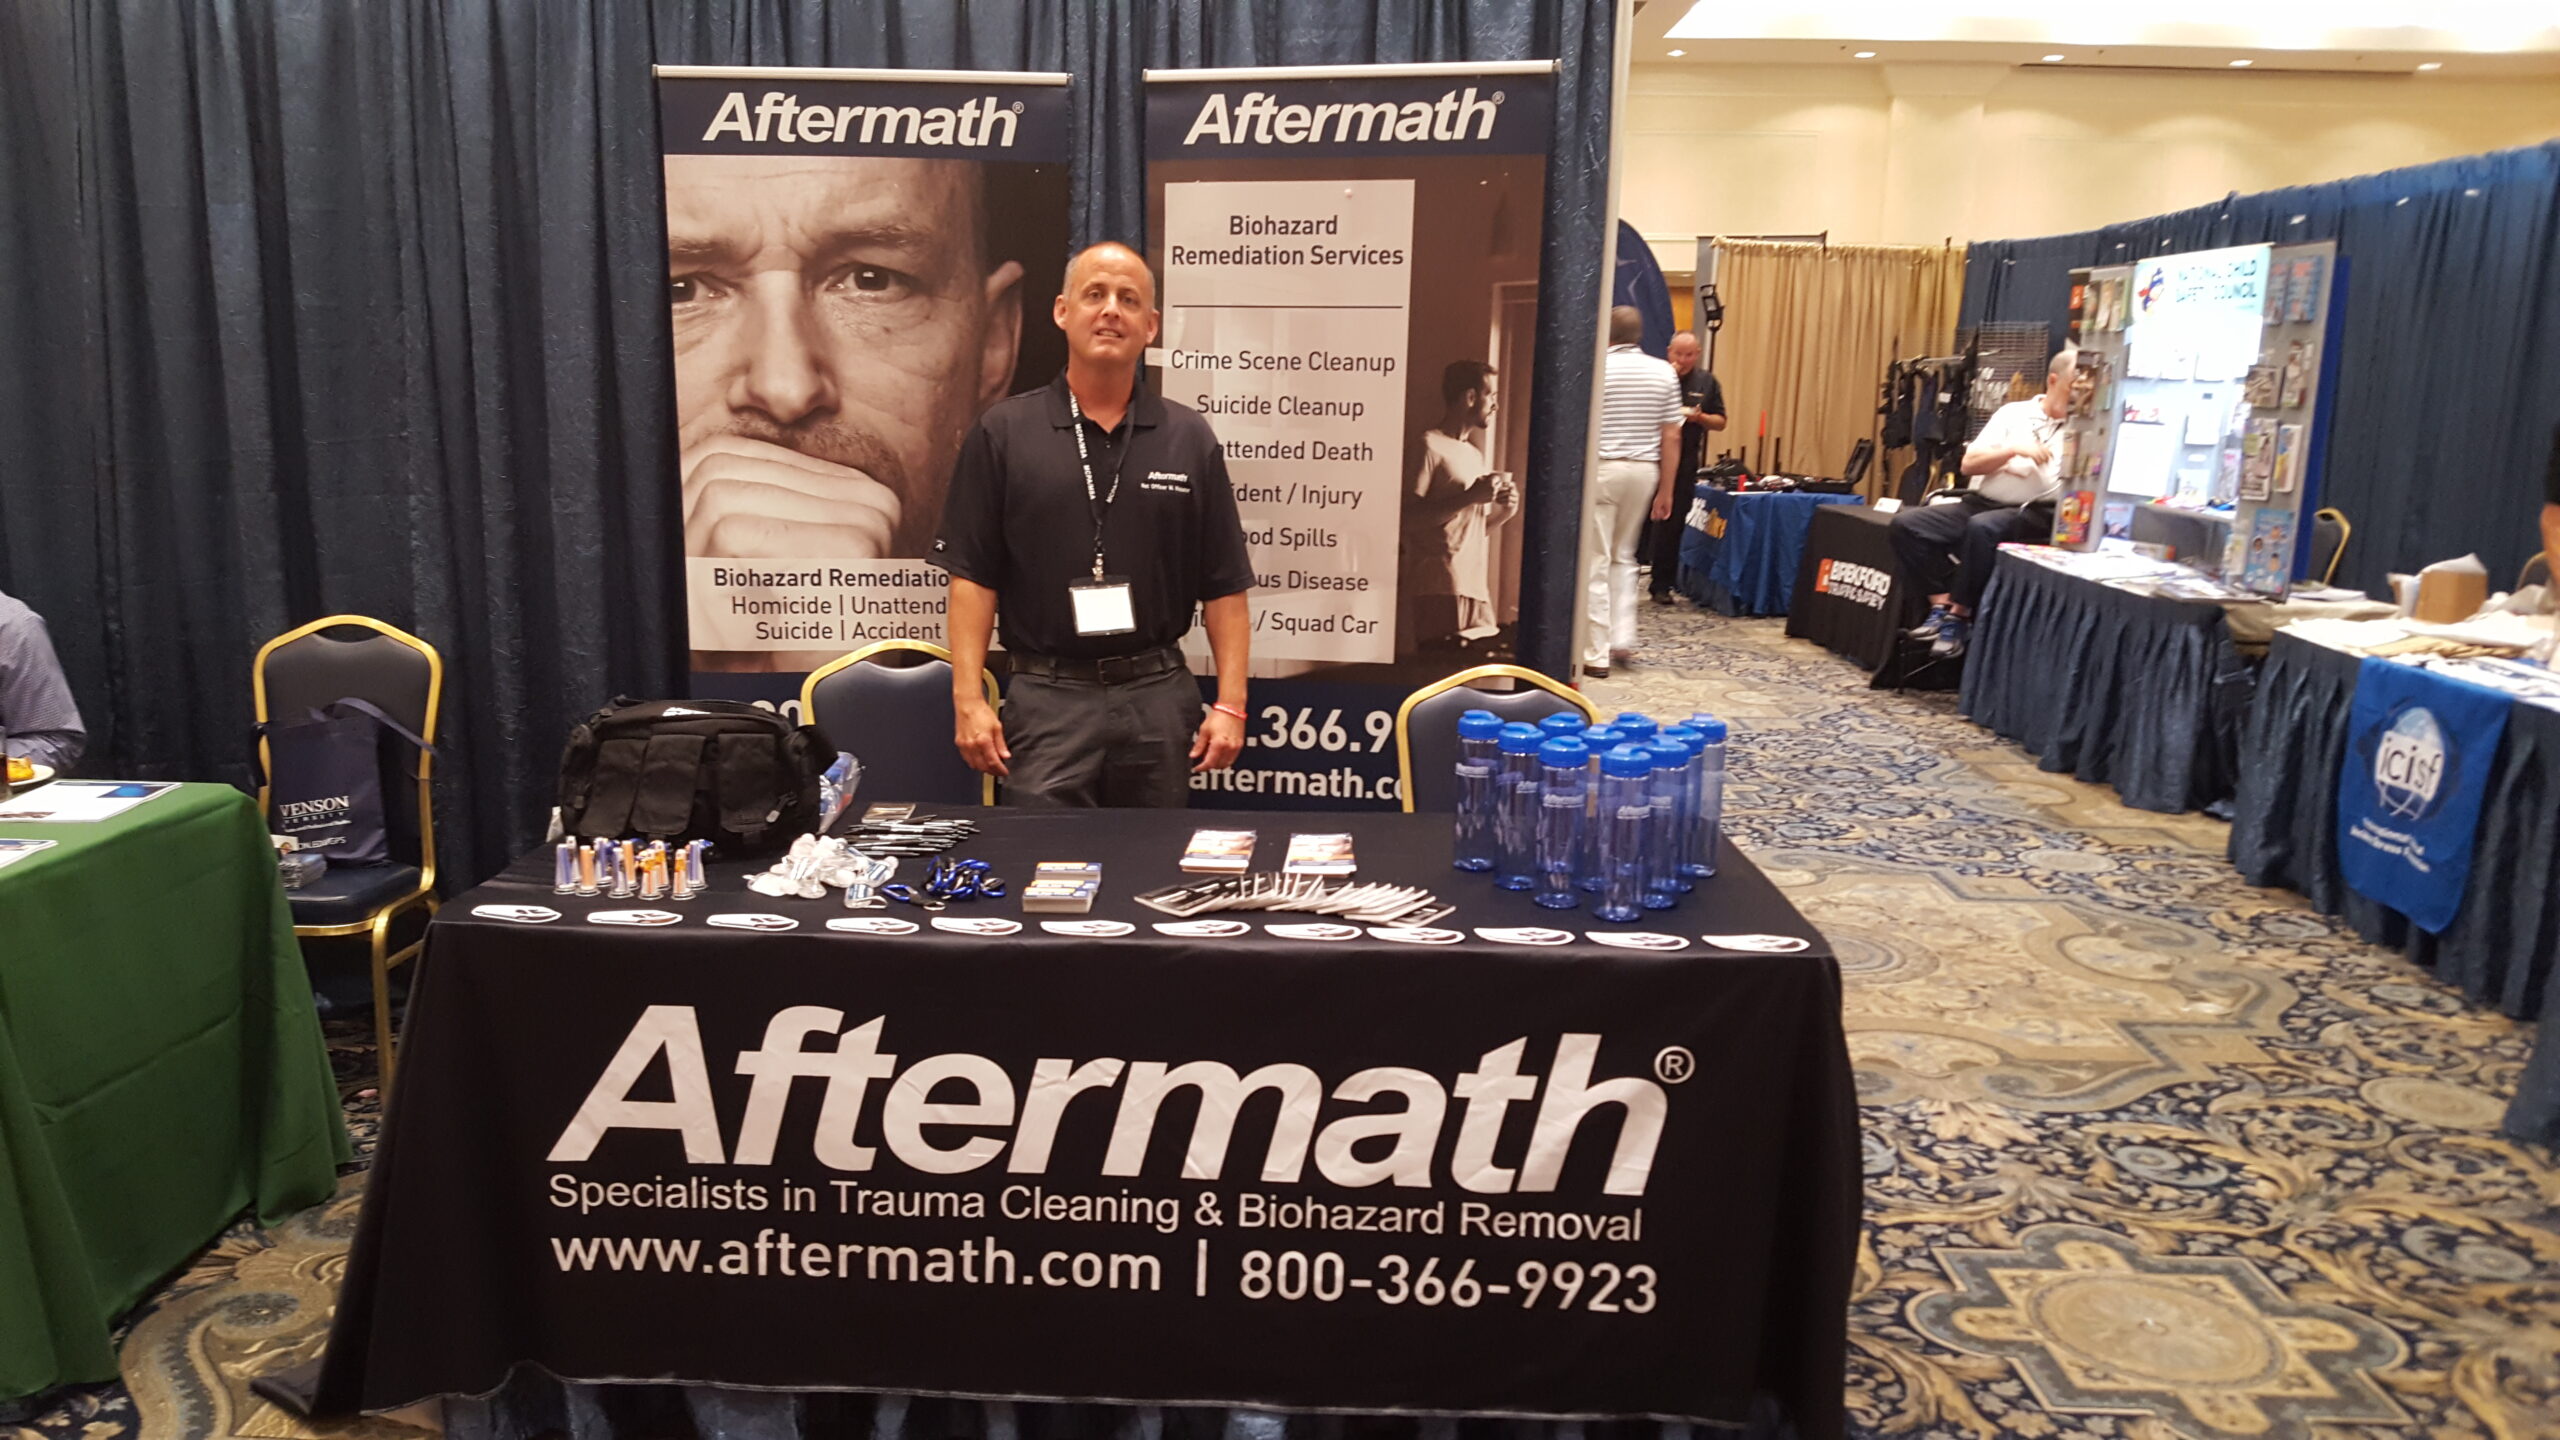 MCPA Conference Aftermath booth.